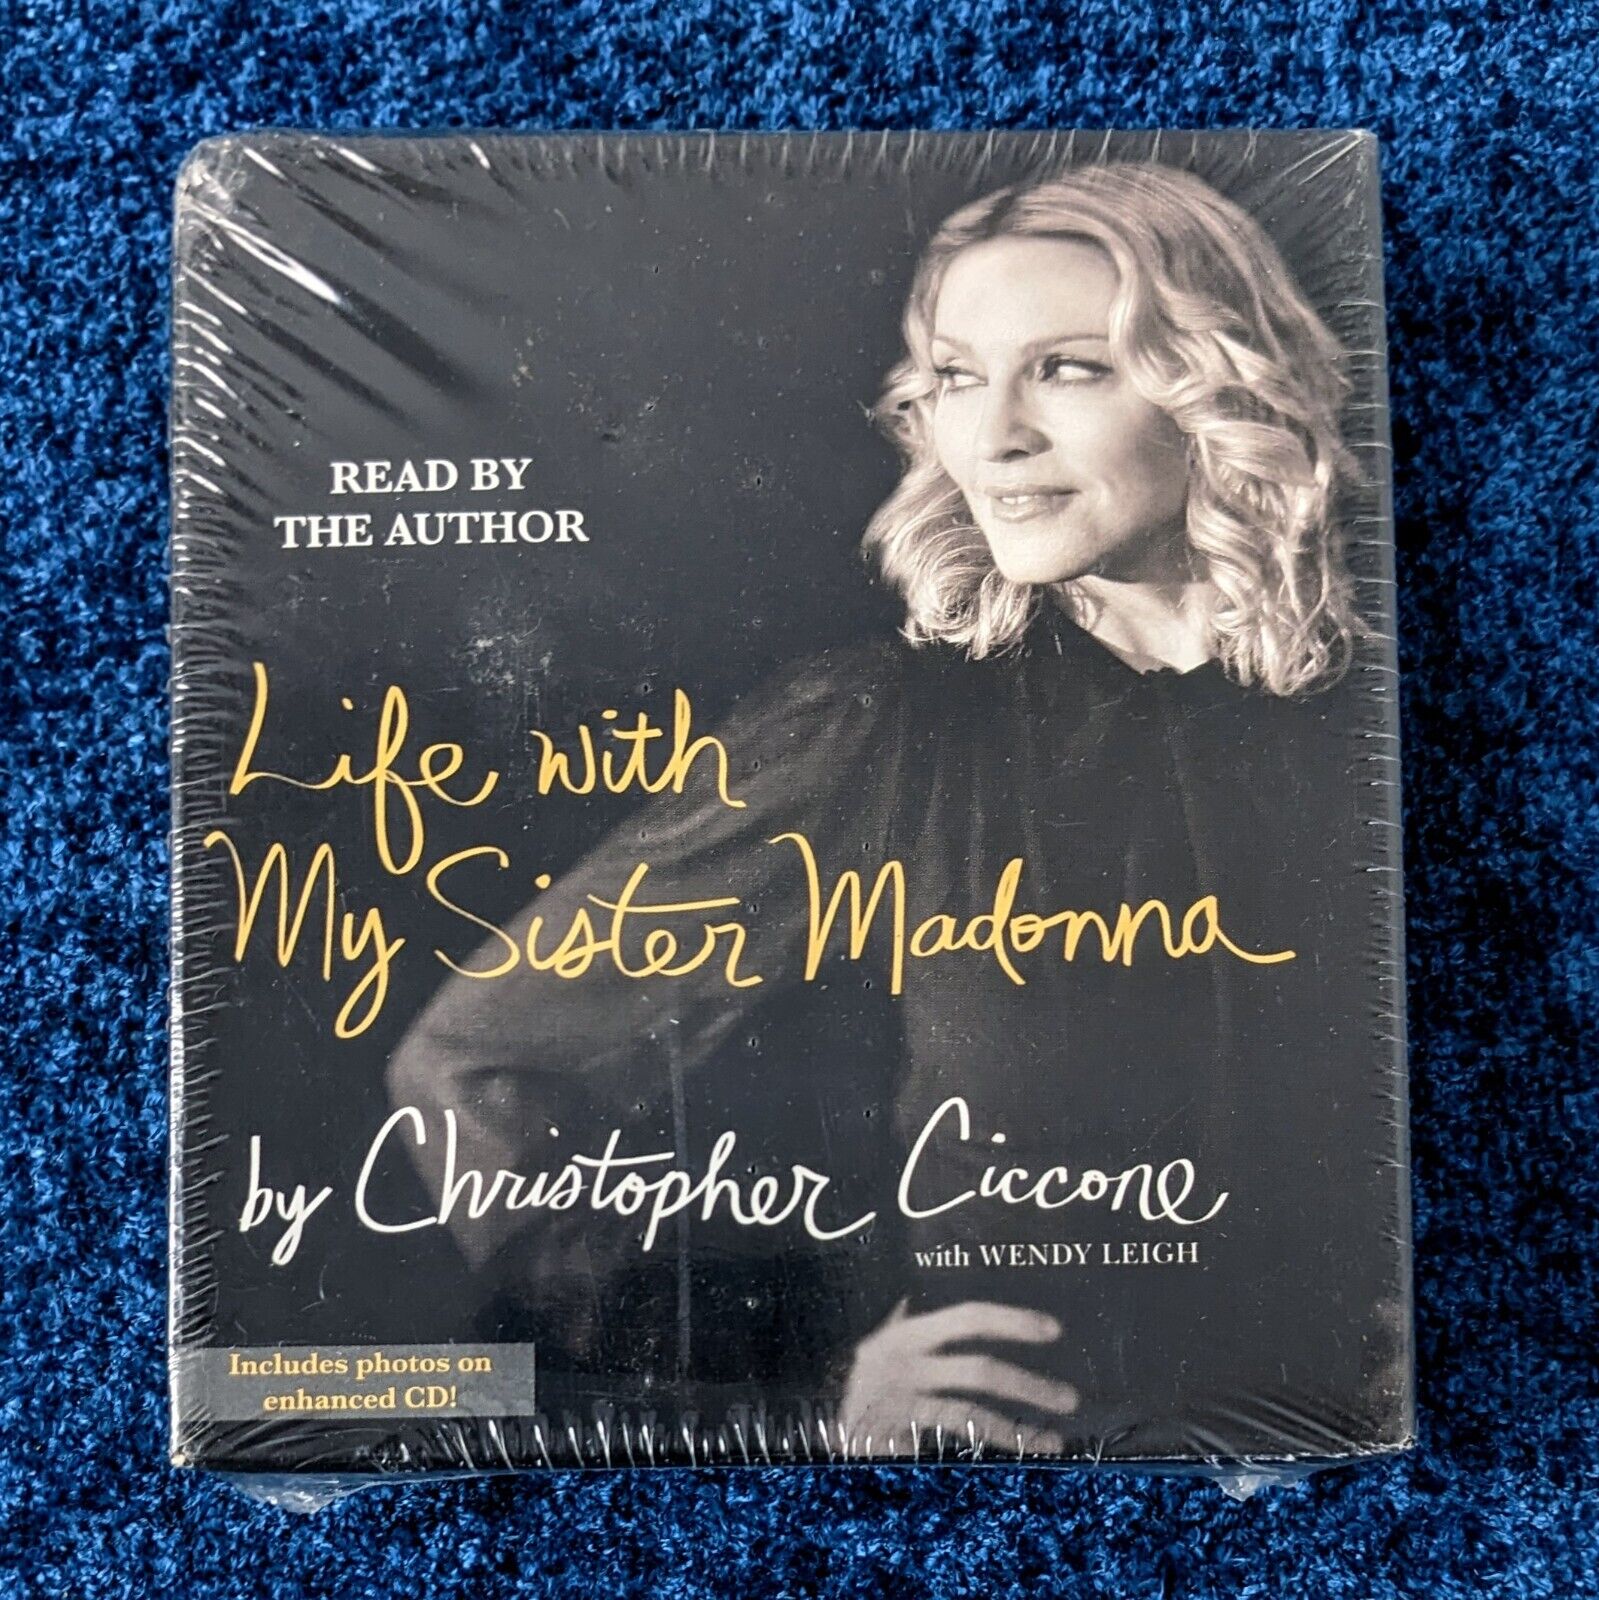 MADONNA SEALED LIFE WITH MY SISTER MADONNA 5 CD BOX SET CHRISTOPHER CICCONE 2008